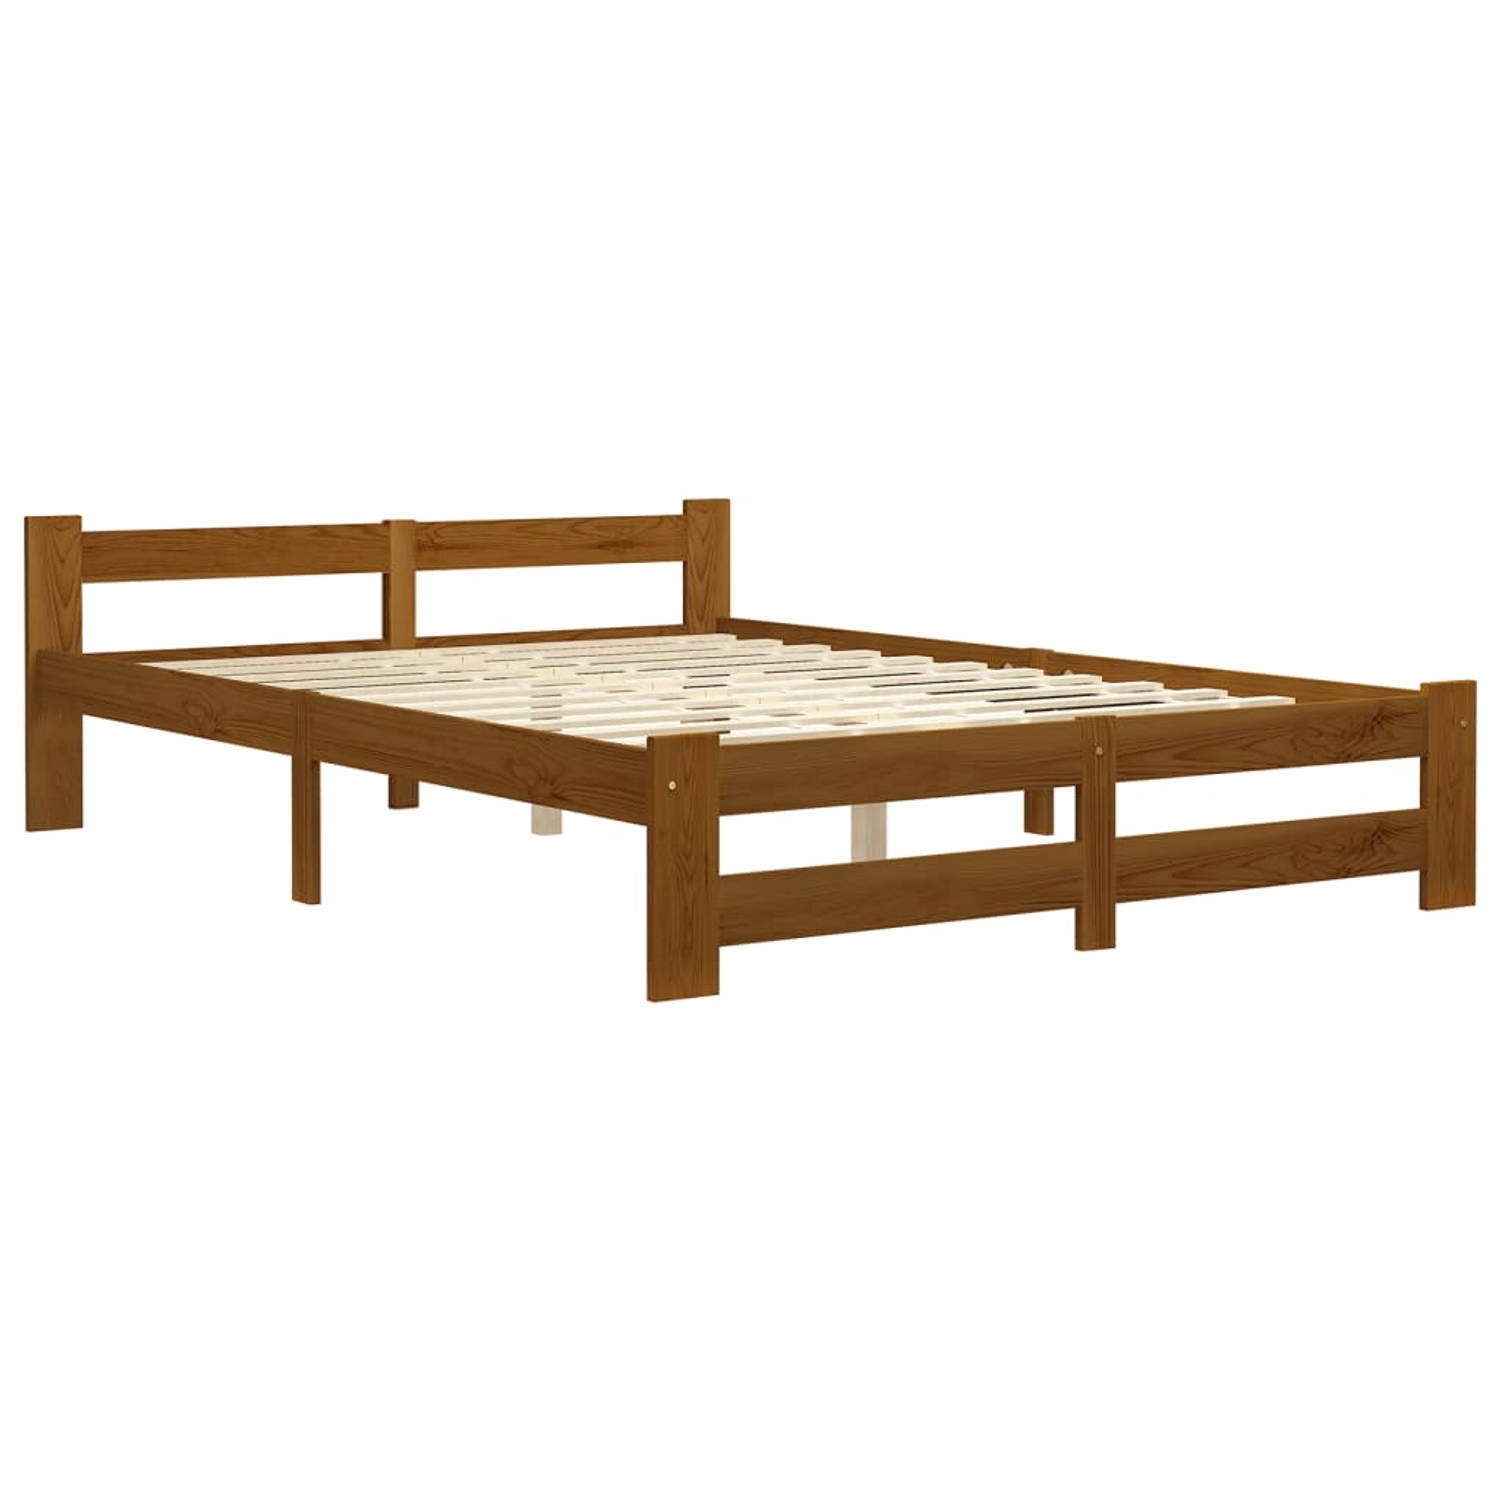 The Living Store Bedframe massief grenenhout honingbruin 140x200 cm - Bedframe - Bedframes - Bed Frame - Bed Frames - Bed - Bedden - Houten Bedframe - Houten Bedframes - 2-persoons